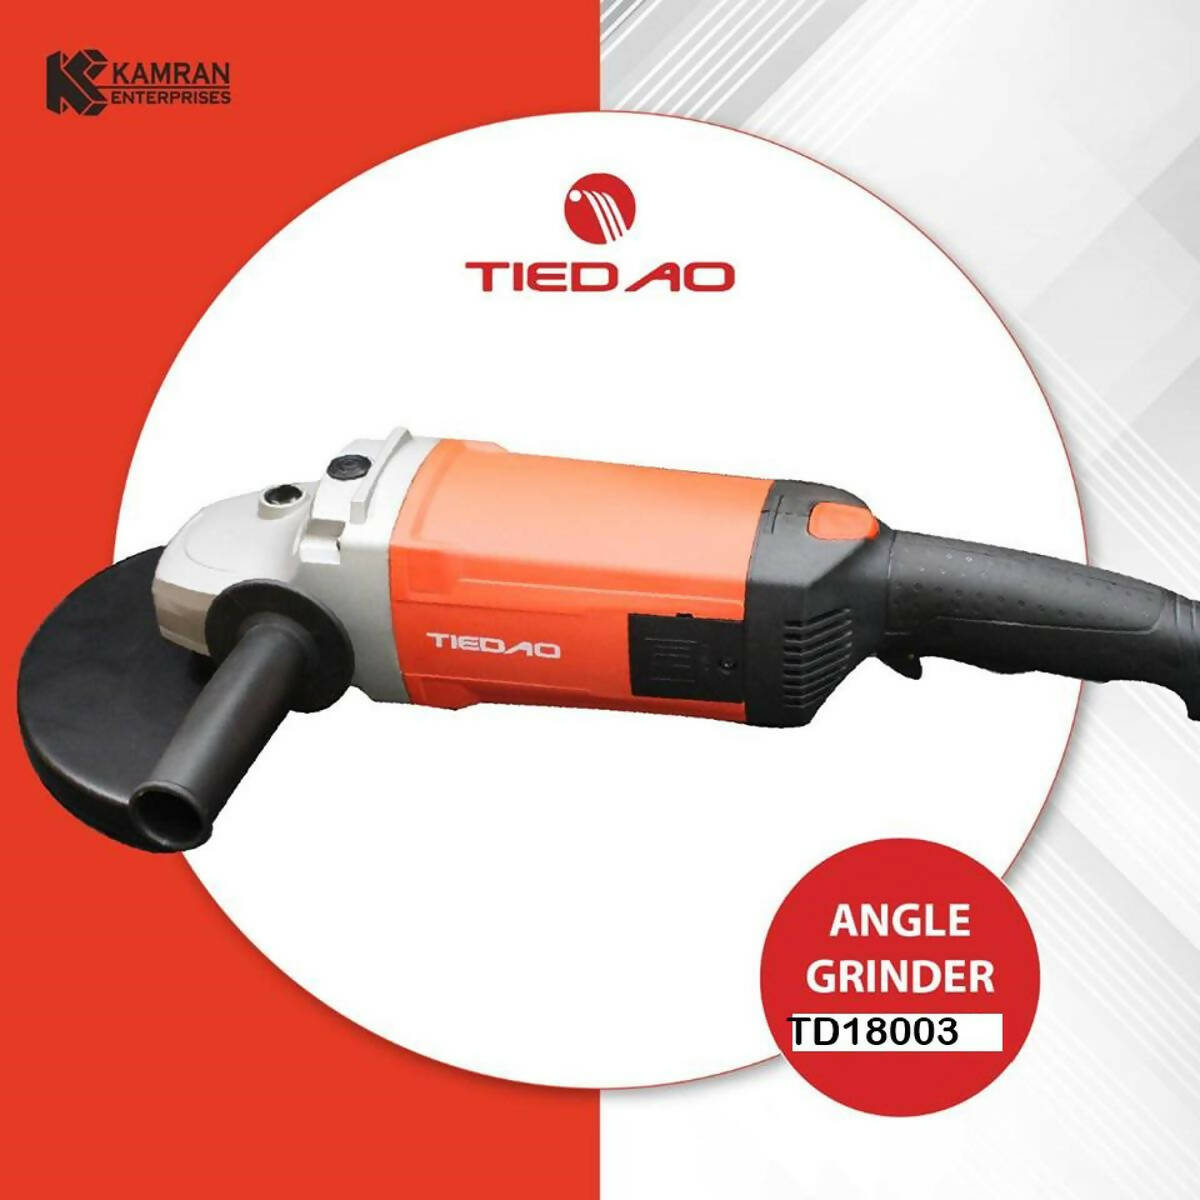 Tiedao 7inch Angle Grinder Td18003 100%copper